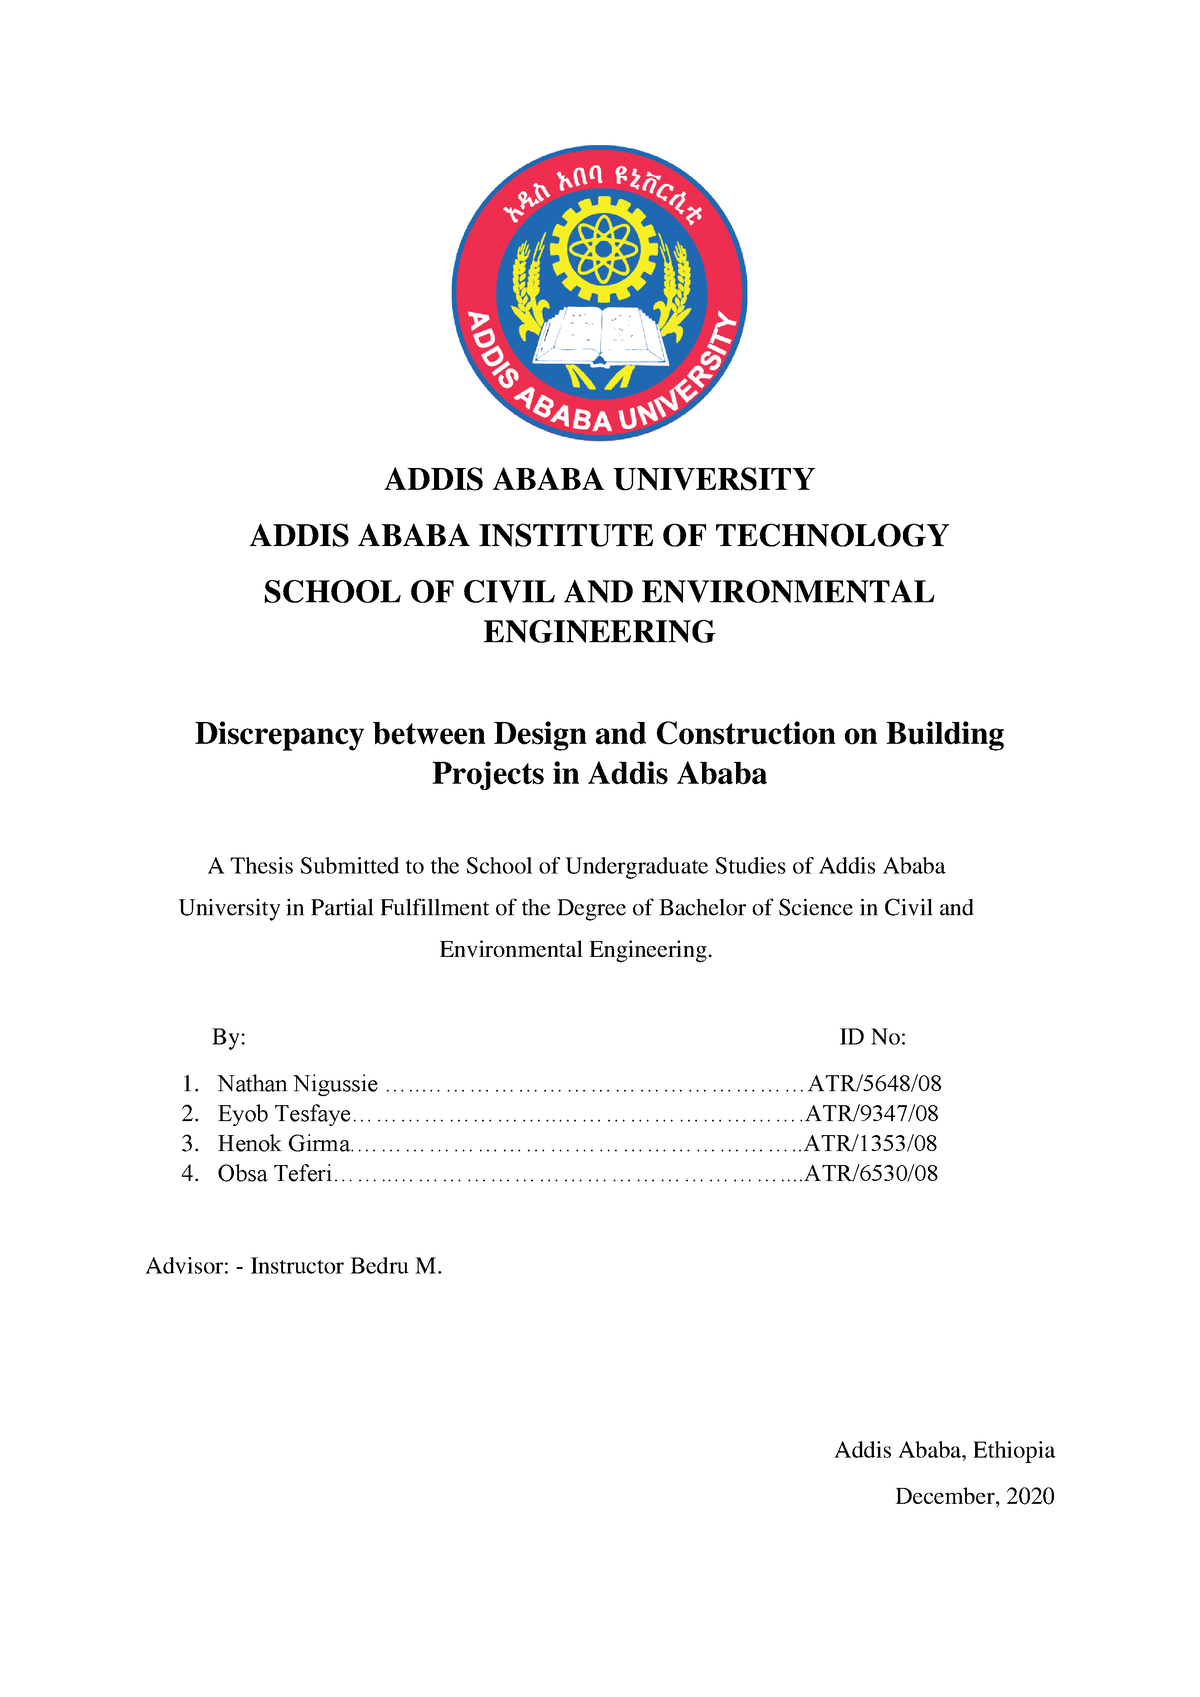 mba thesis in addis ababa university